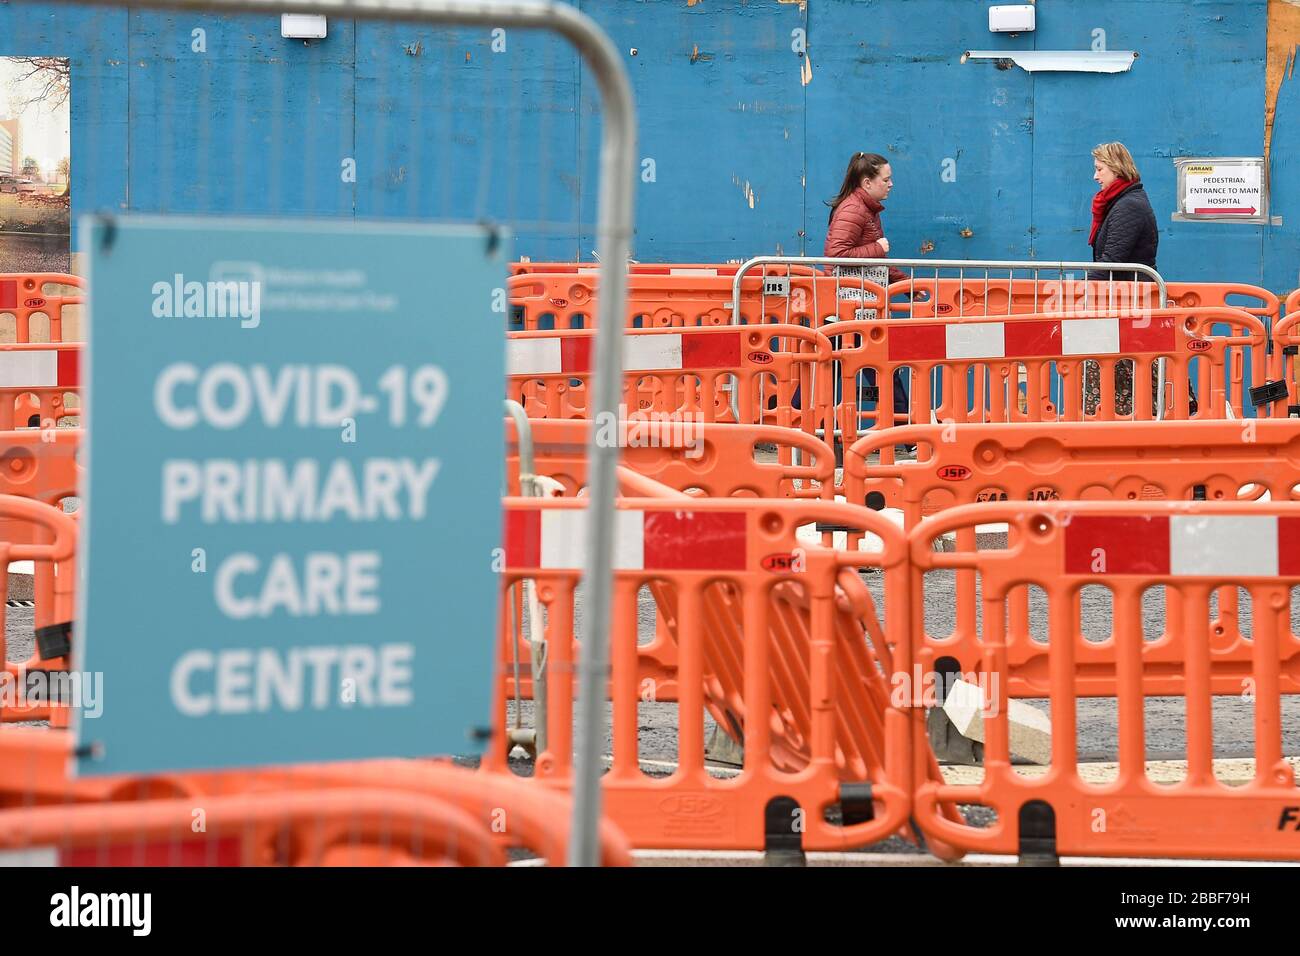 People walk past coronavirus signs at the Covid-19 Centre at Altnagelvin Hospital, Londonderry, as the UK continues in lockdown to help curb the spread of the coronavirus. Stock Photo